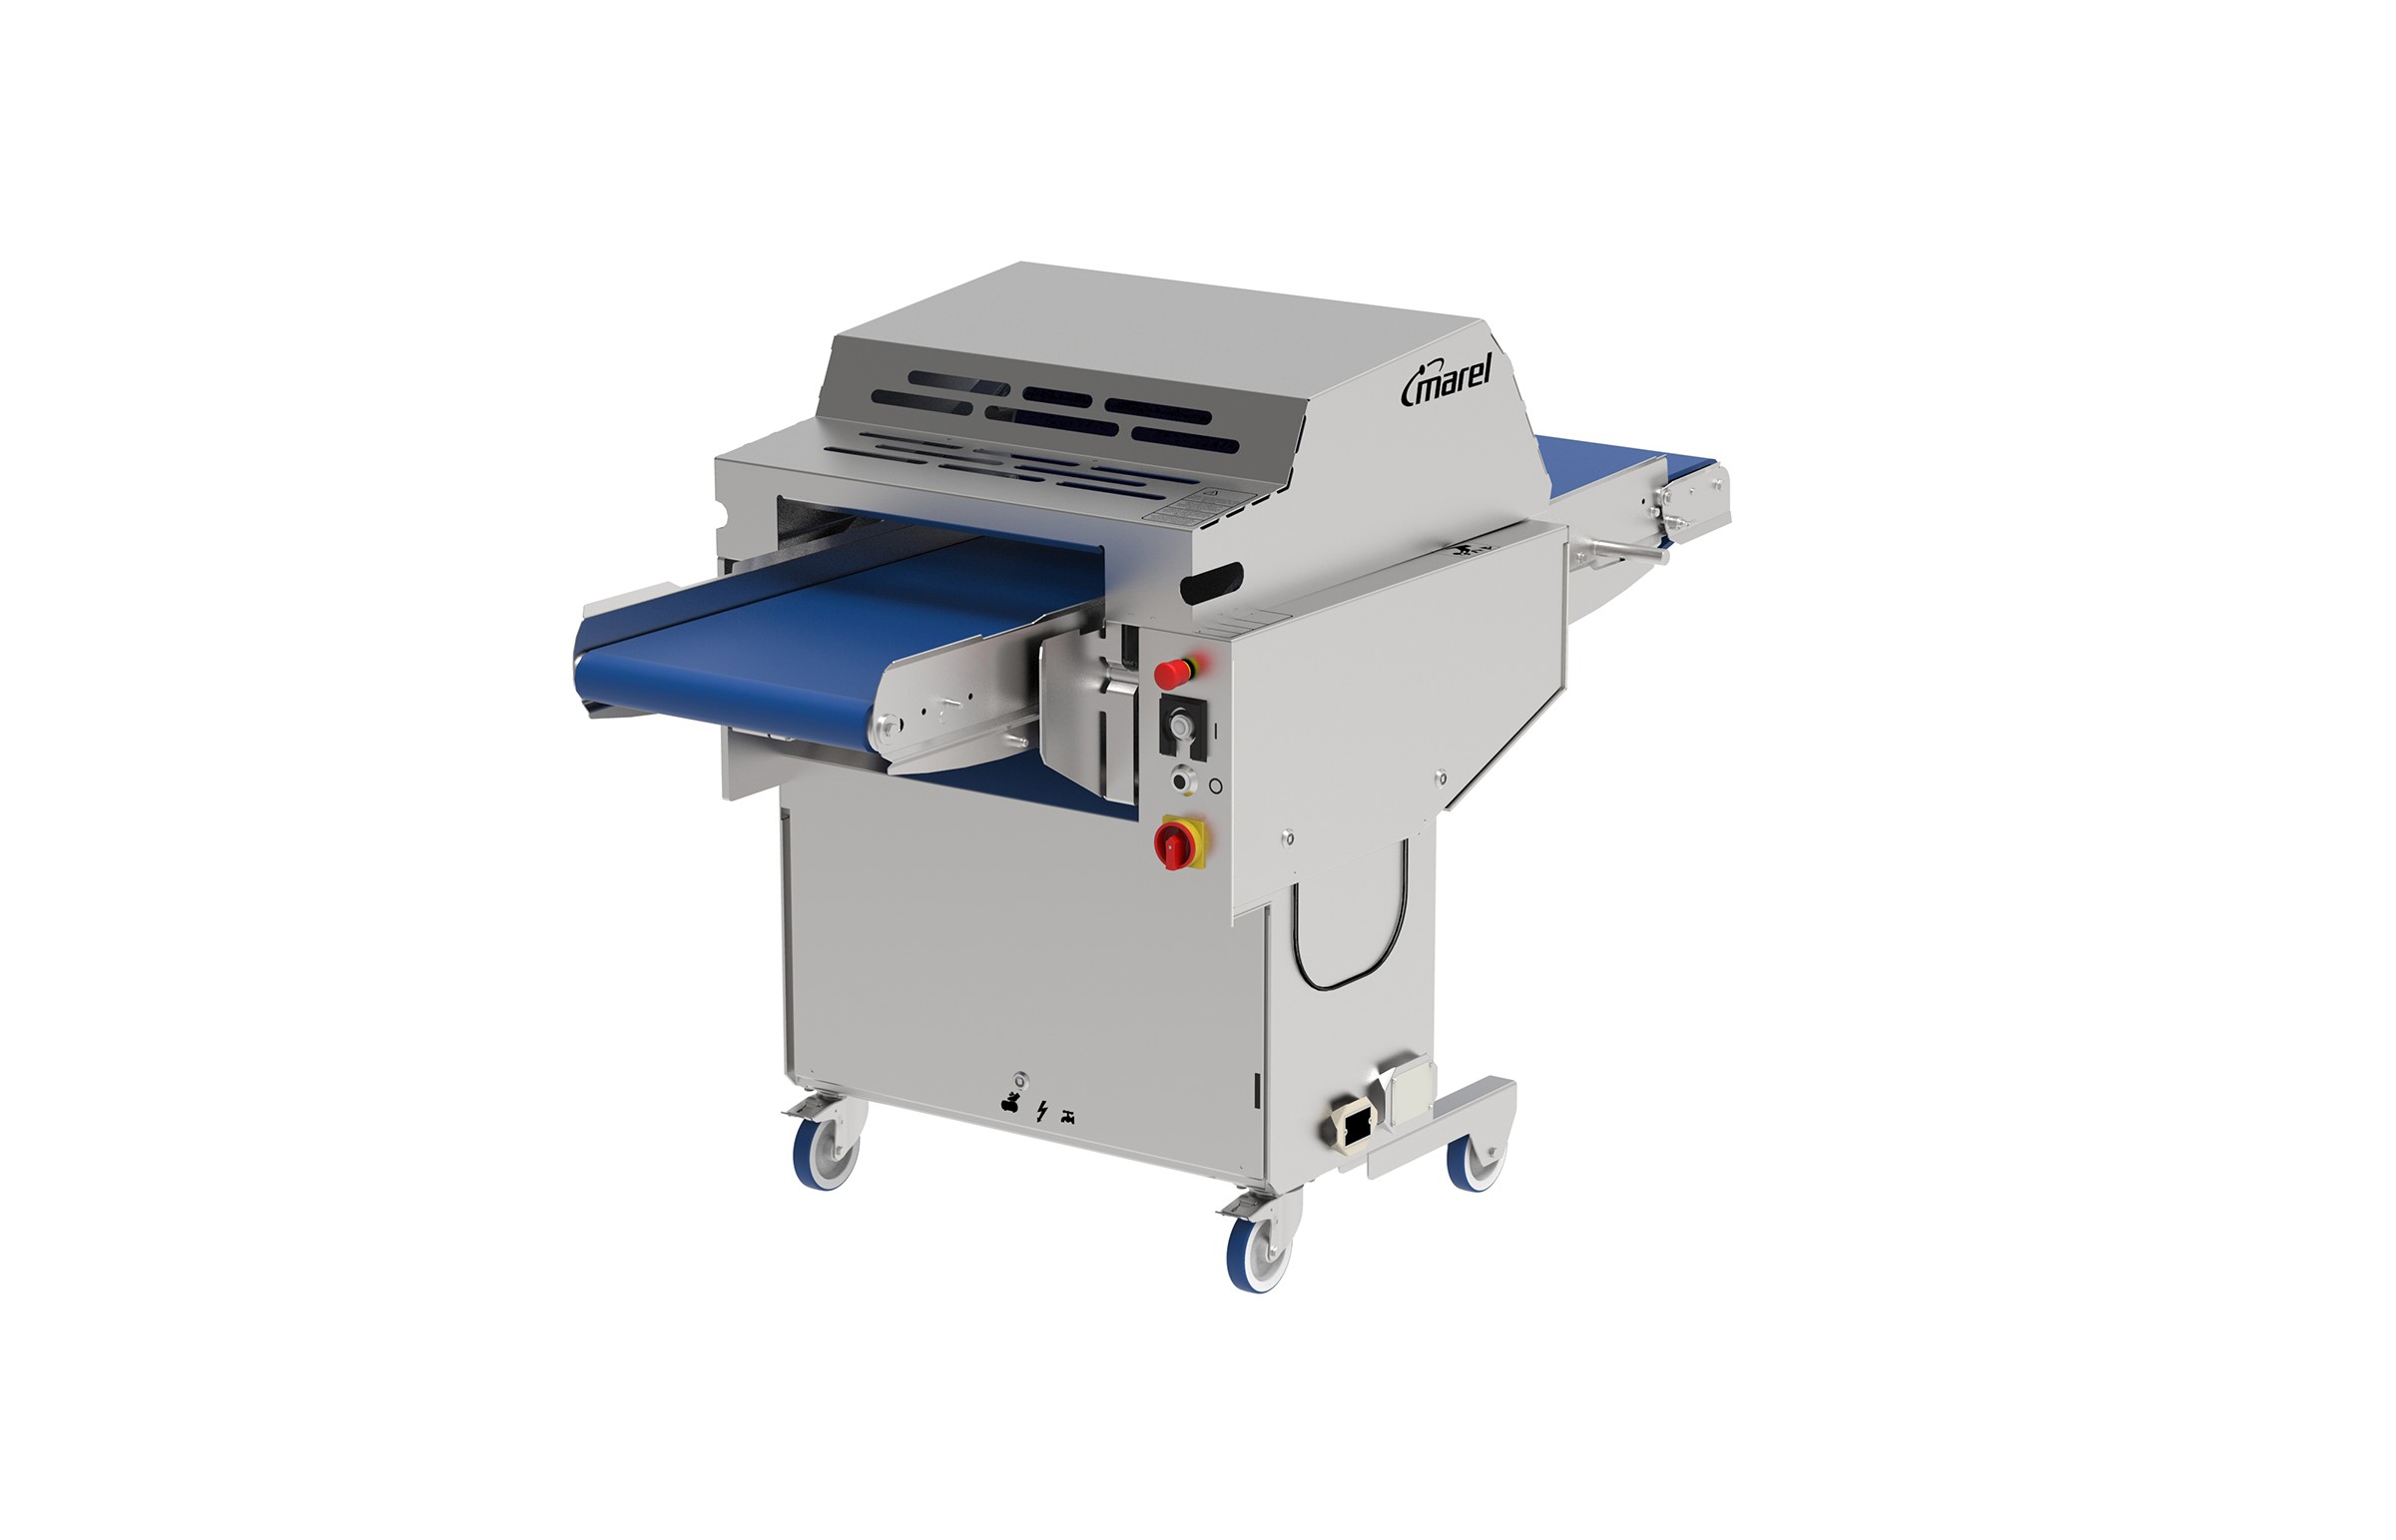 Townsend SK 14-410 conveyorized membrane and poultry skinner